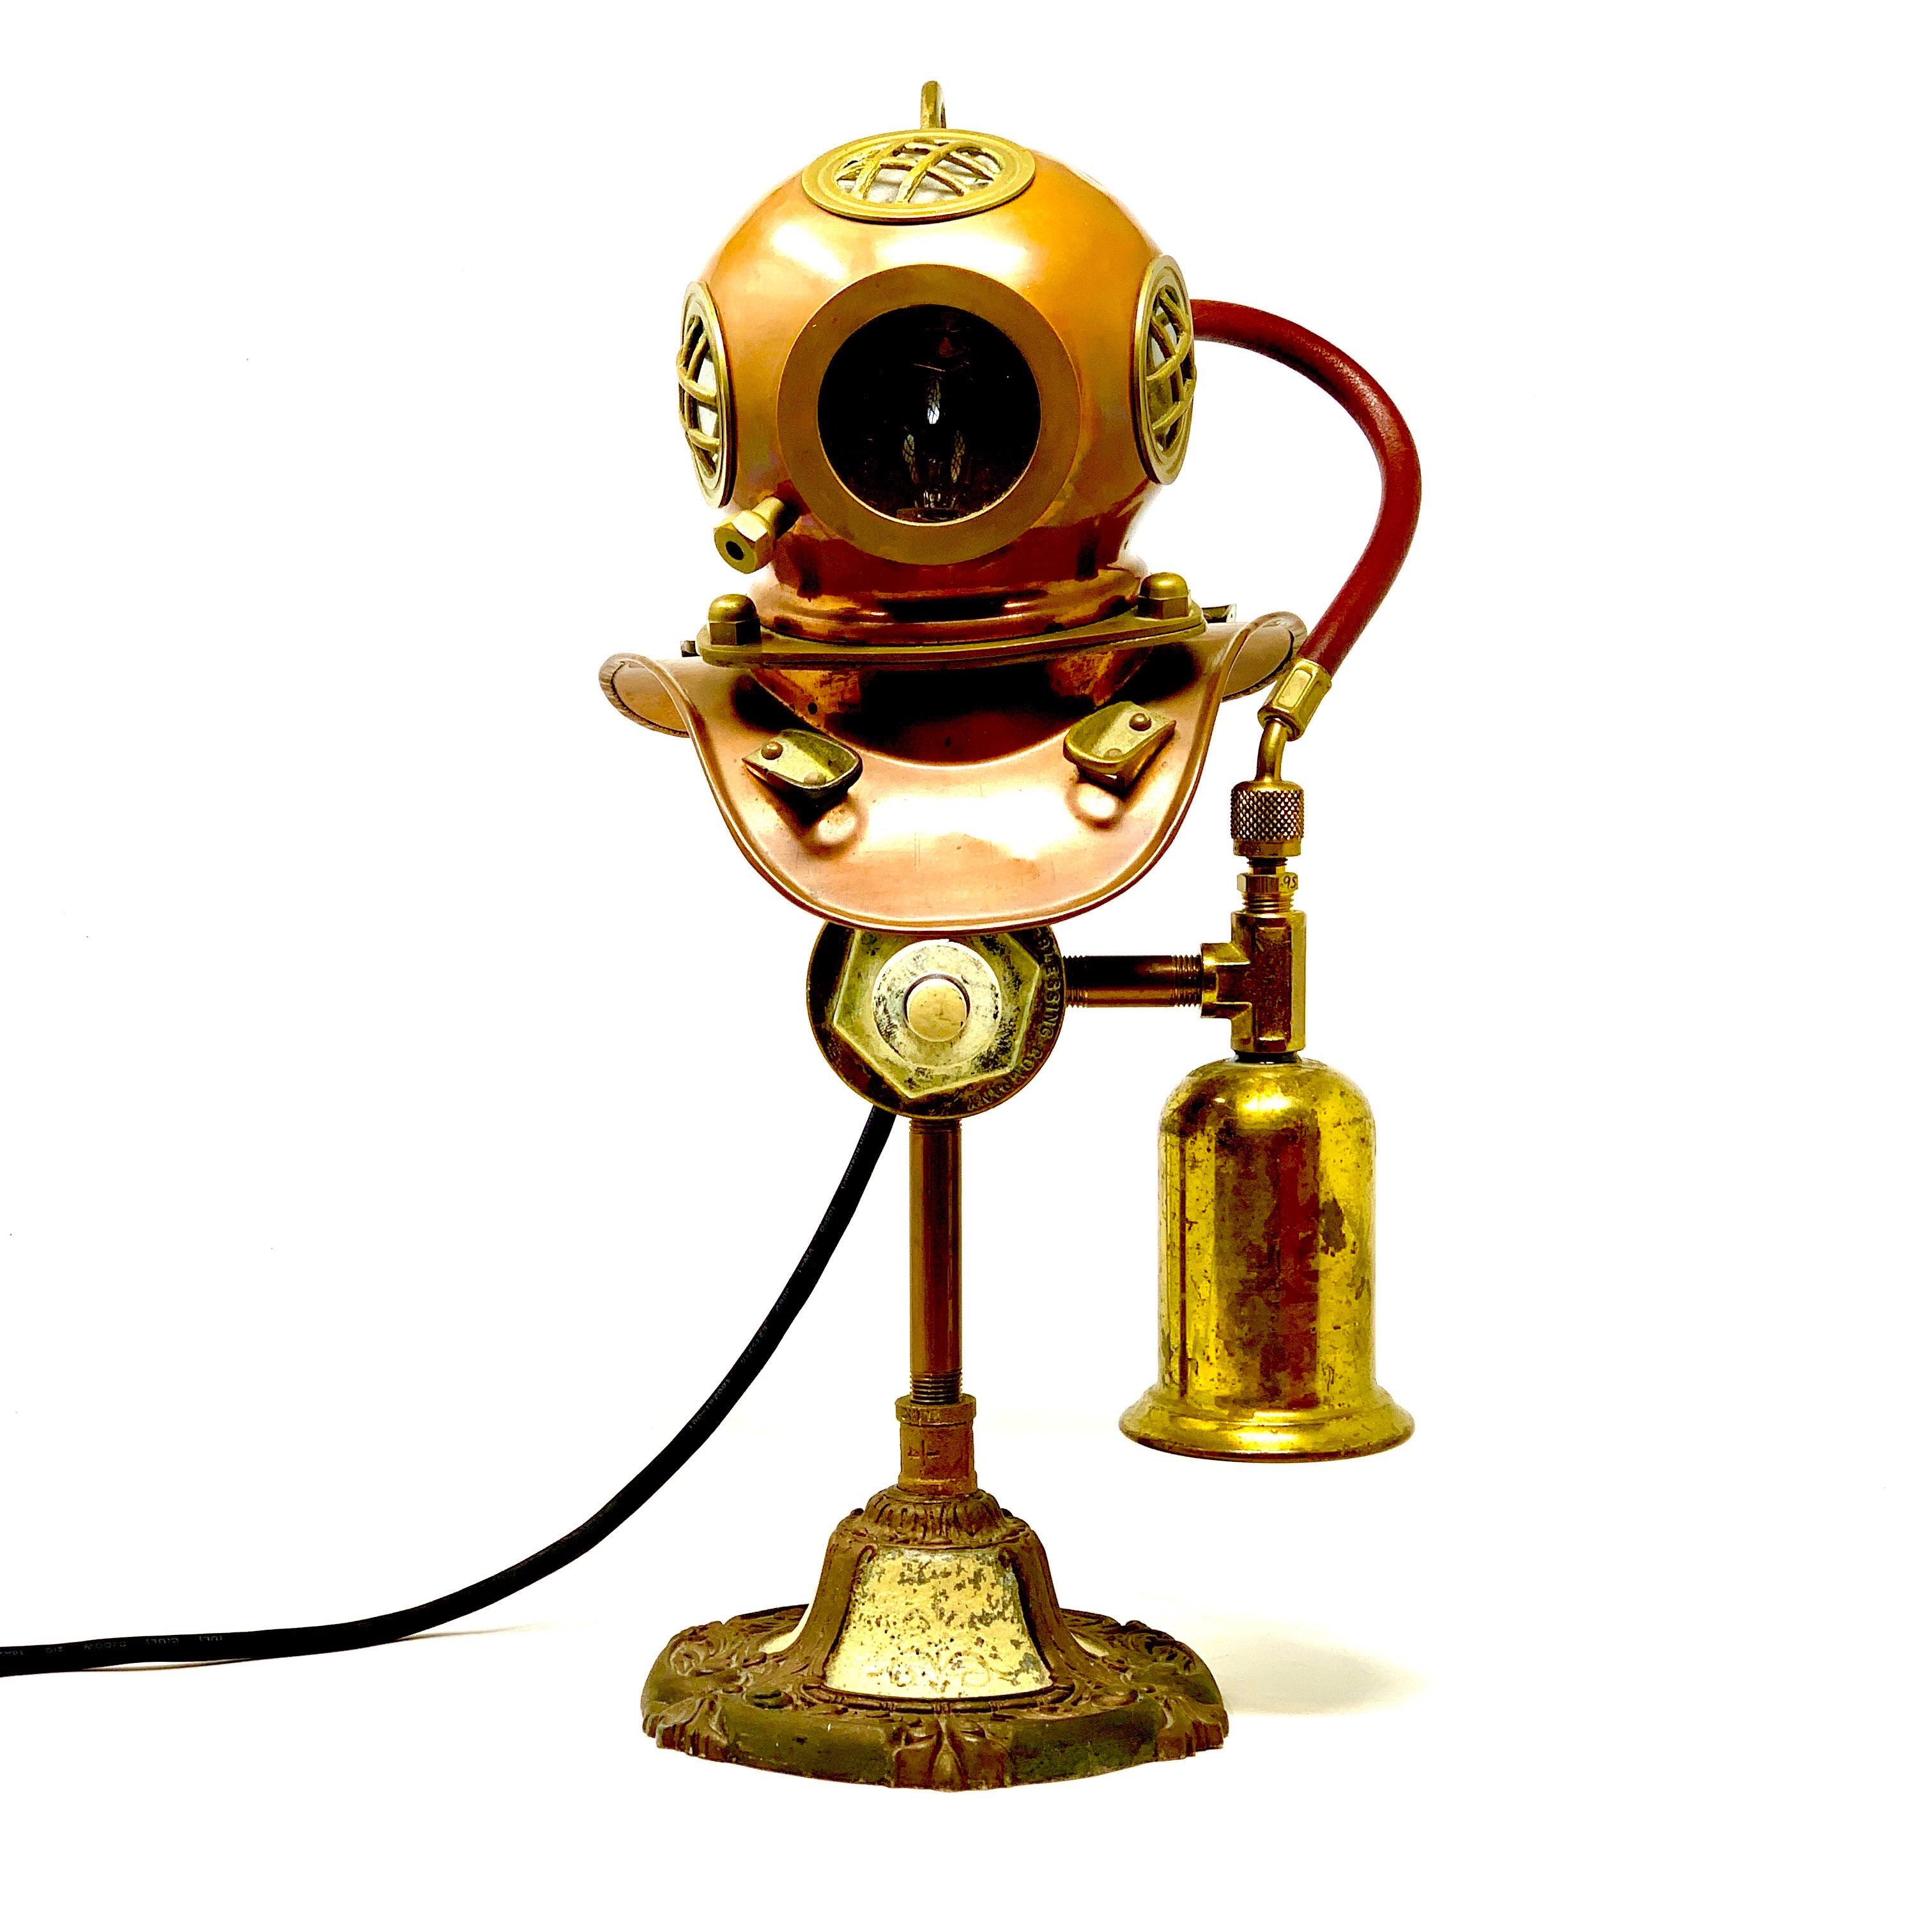 Vintage steampunk lamp made from a 1970s Rolex brass diving helmet display, with a vintage iron base and unique details. A very unique piece, in excellent vintage condition.

Width: 10 in / Depth: 7 in / Height: 16.75 in